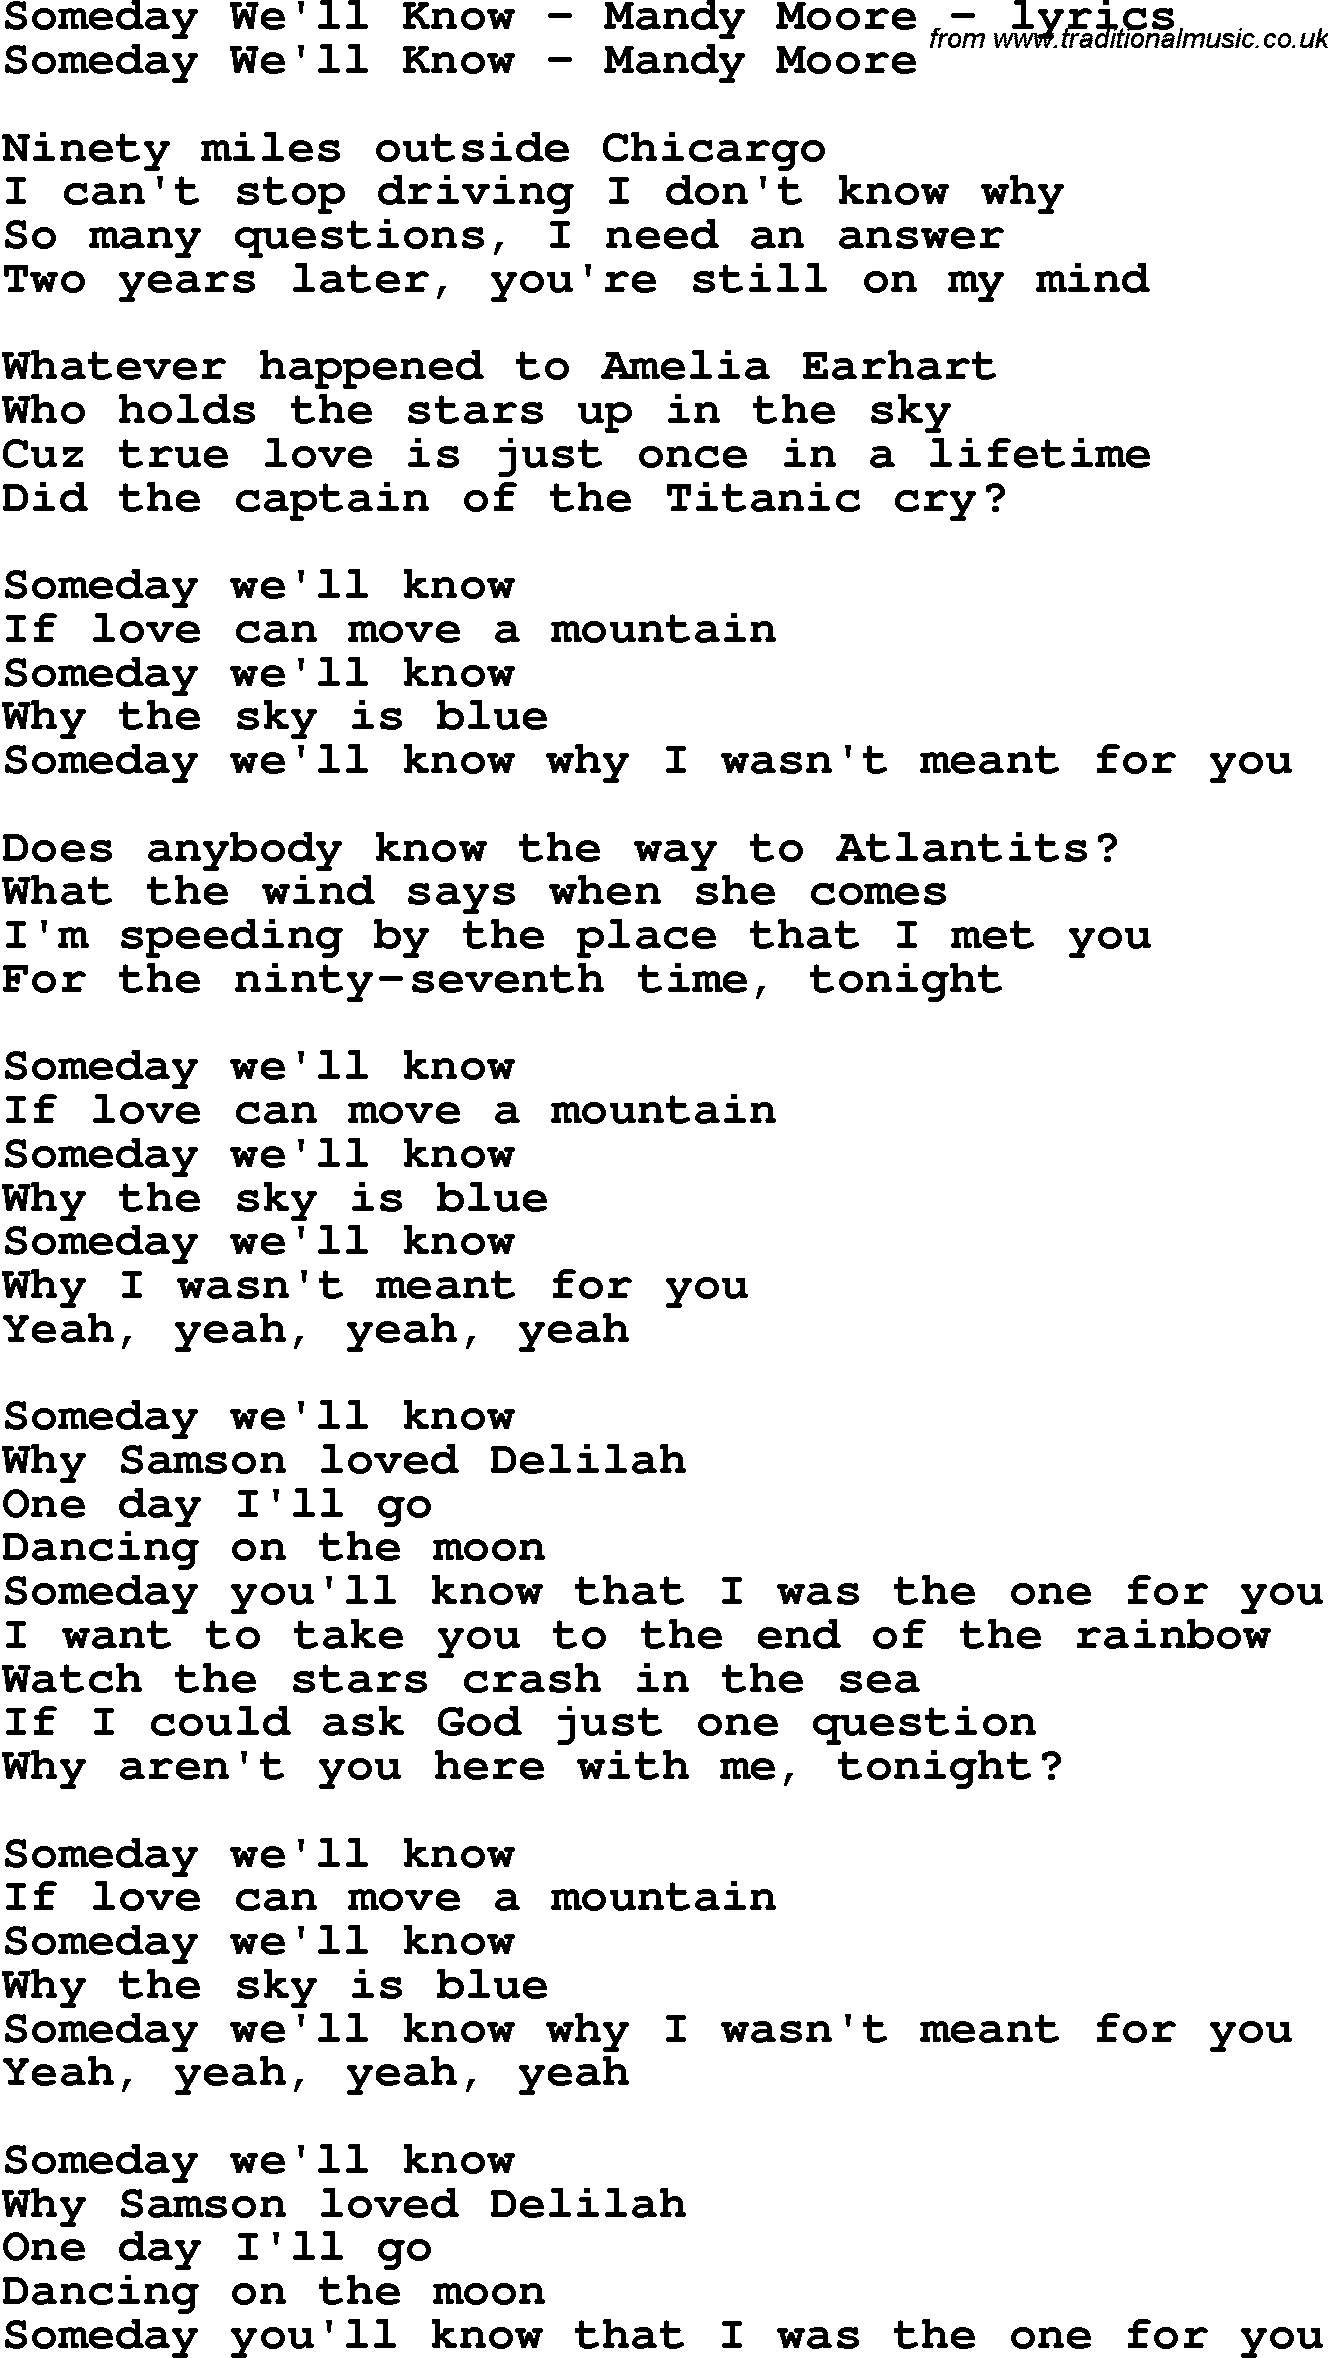 Love Song Lyrics for: Someday We'll Know - Mandy Moore